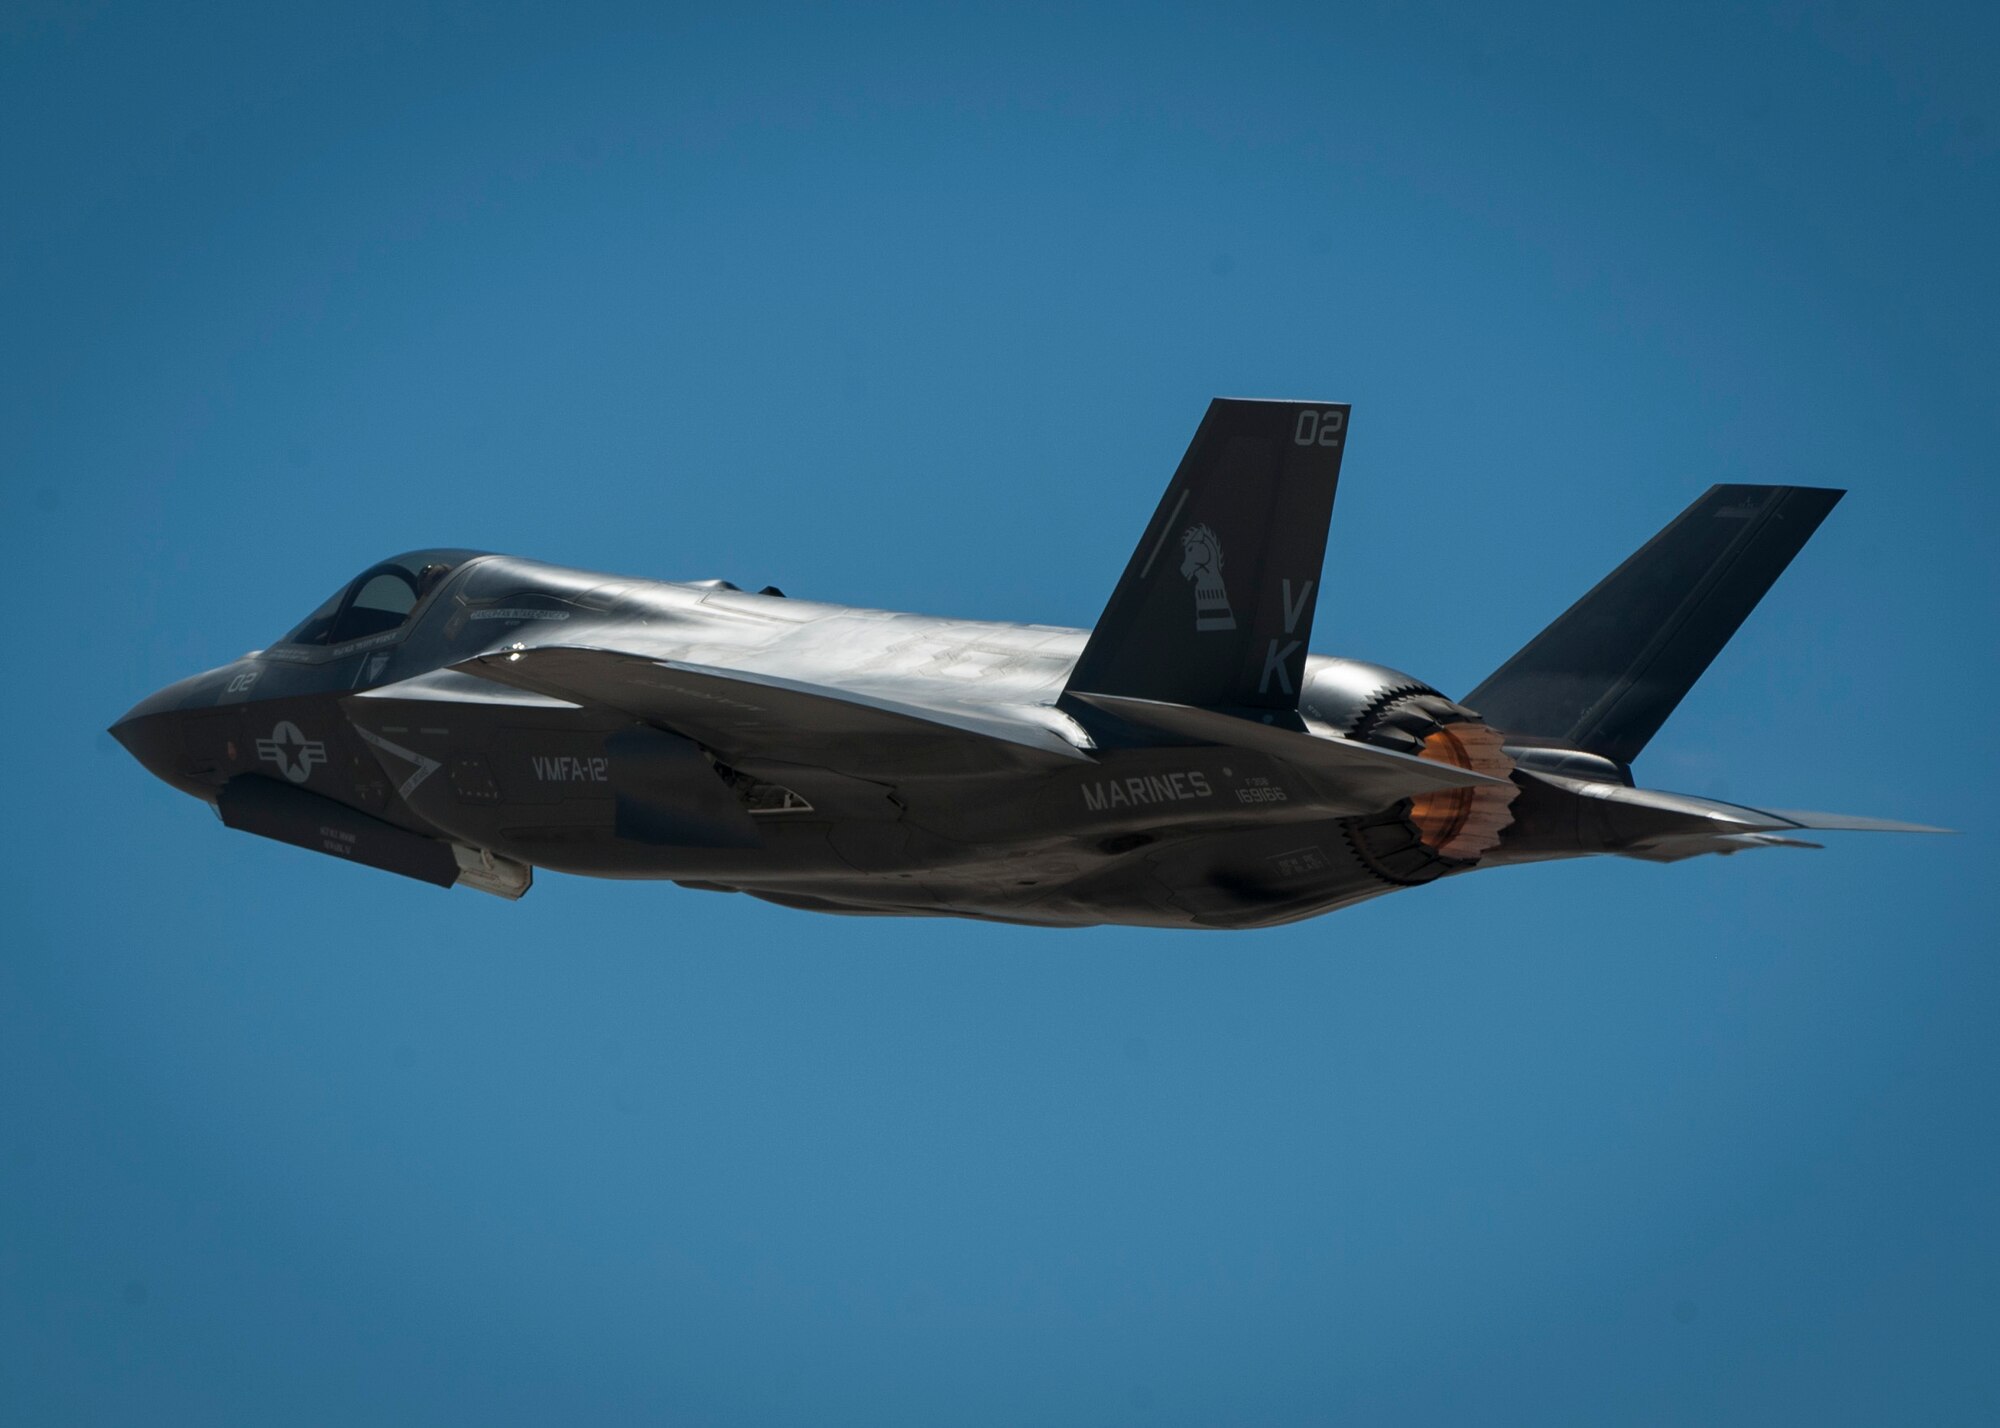 An F-35B from Marine Corps Air Station Yuma, Ariz., takes off from the Nellis Air Force Base, Nev., flightline for a training sortie during Red Flag 16-3, July 19, 2016. During the exercise, the F-35B will test its advanced capabilities against other aircraft from the U.S. Air Force and U.S. Navy. (U.S. Air Force photo by Senior Airman Jake Carter/Released)